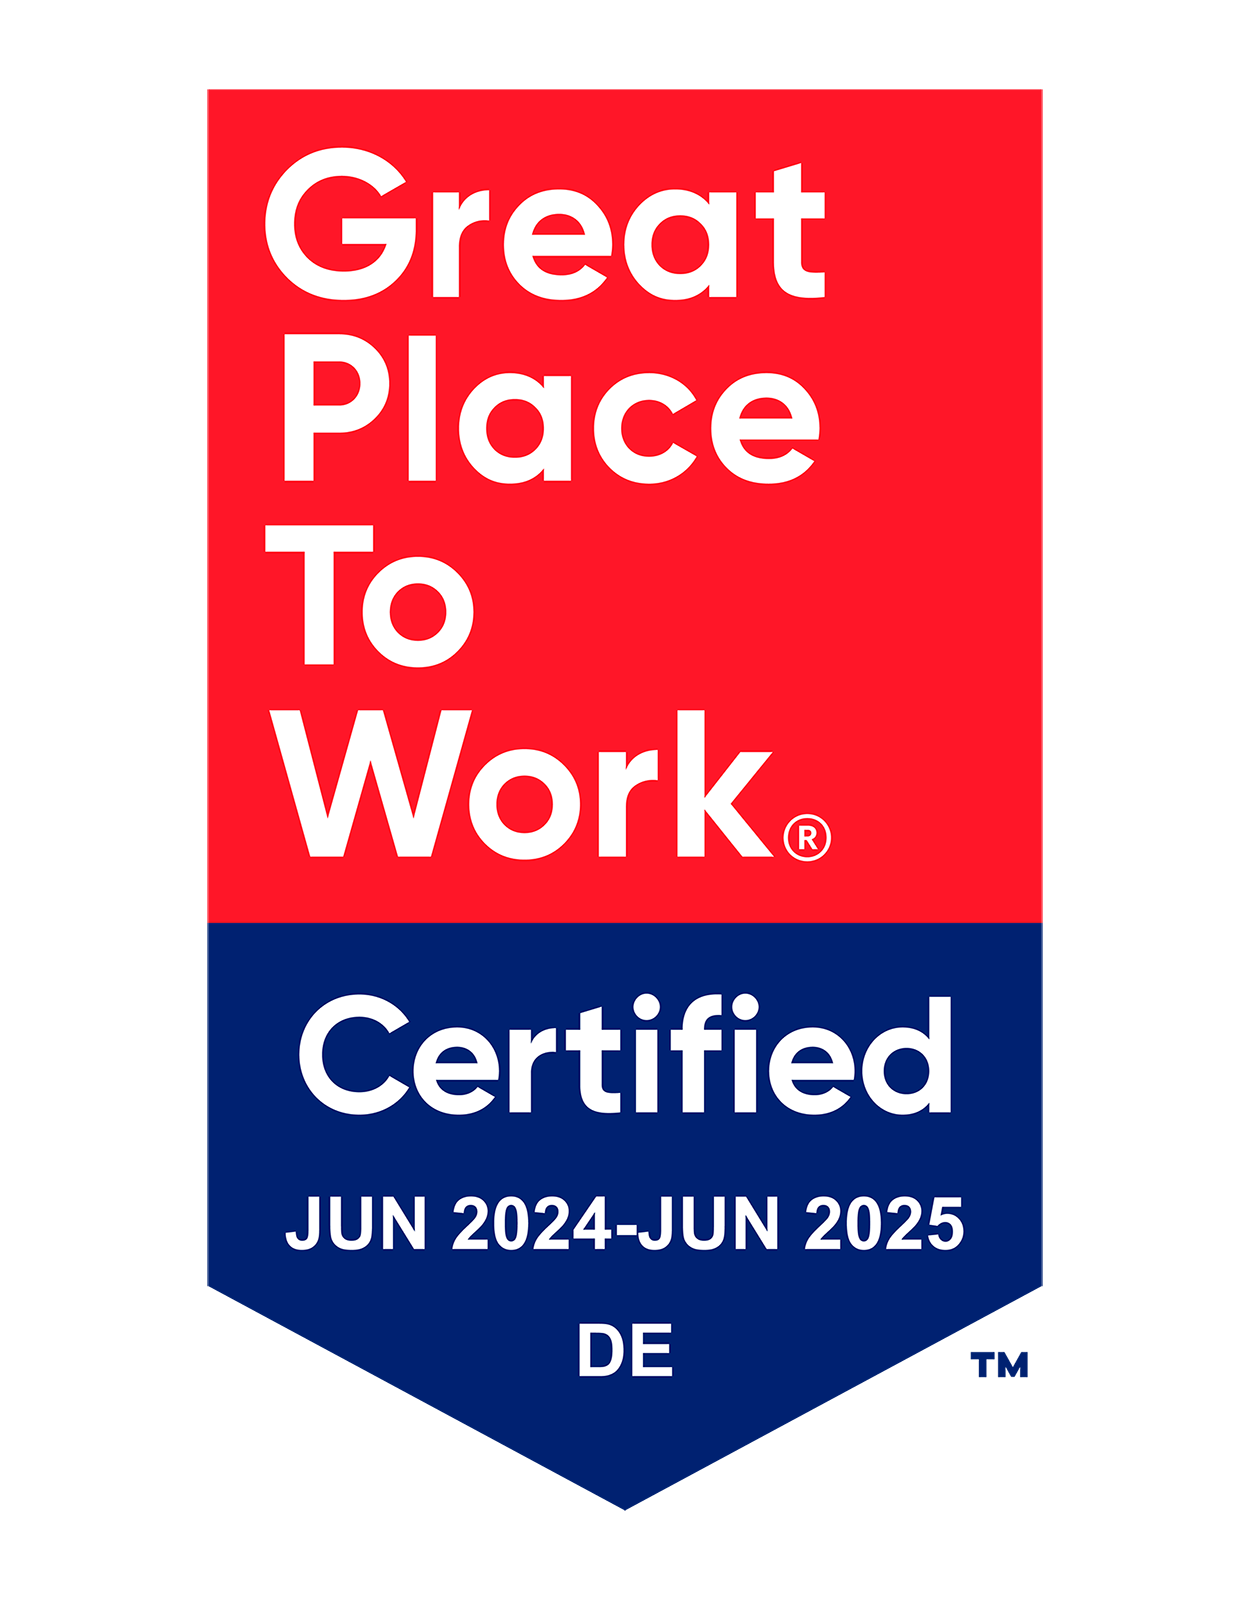 BRITA Great place to work certification 2024 and 2025